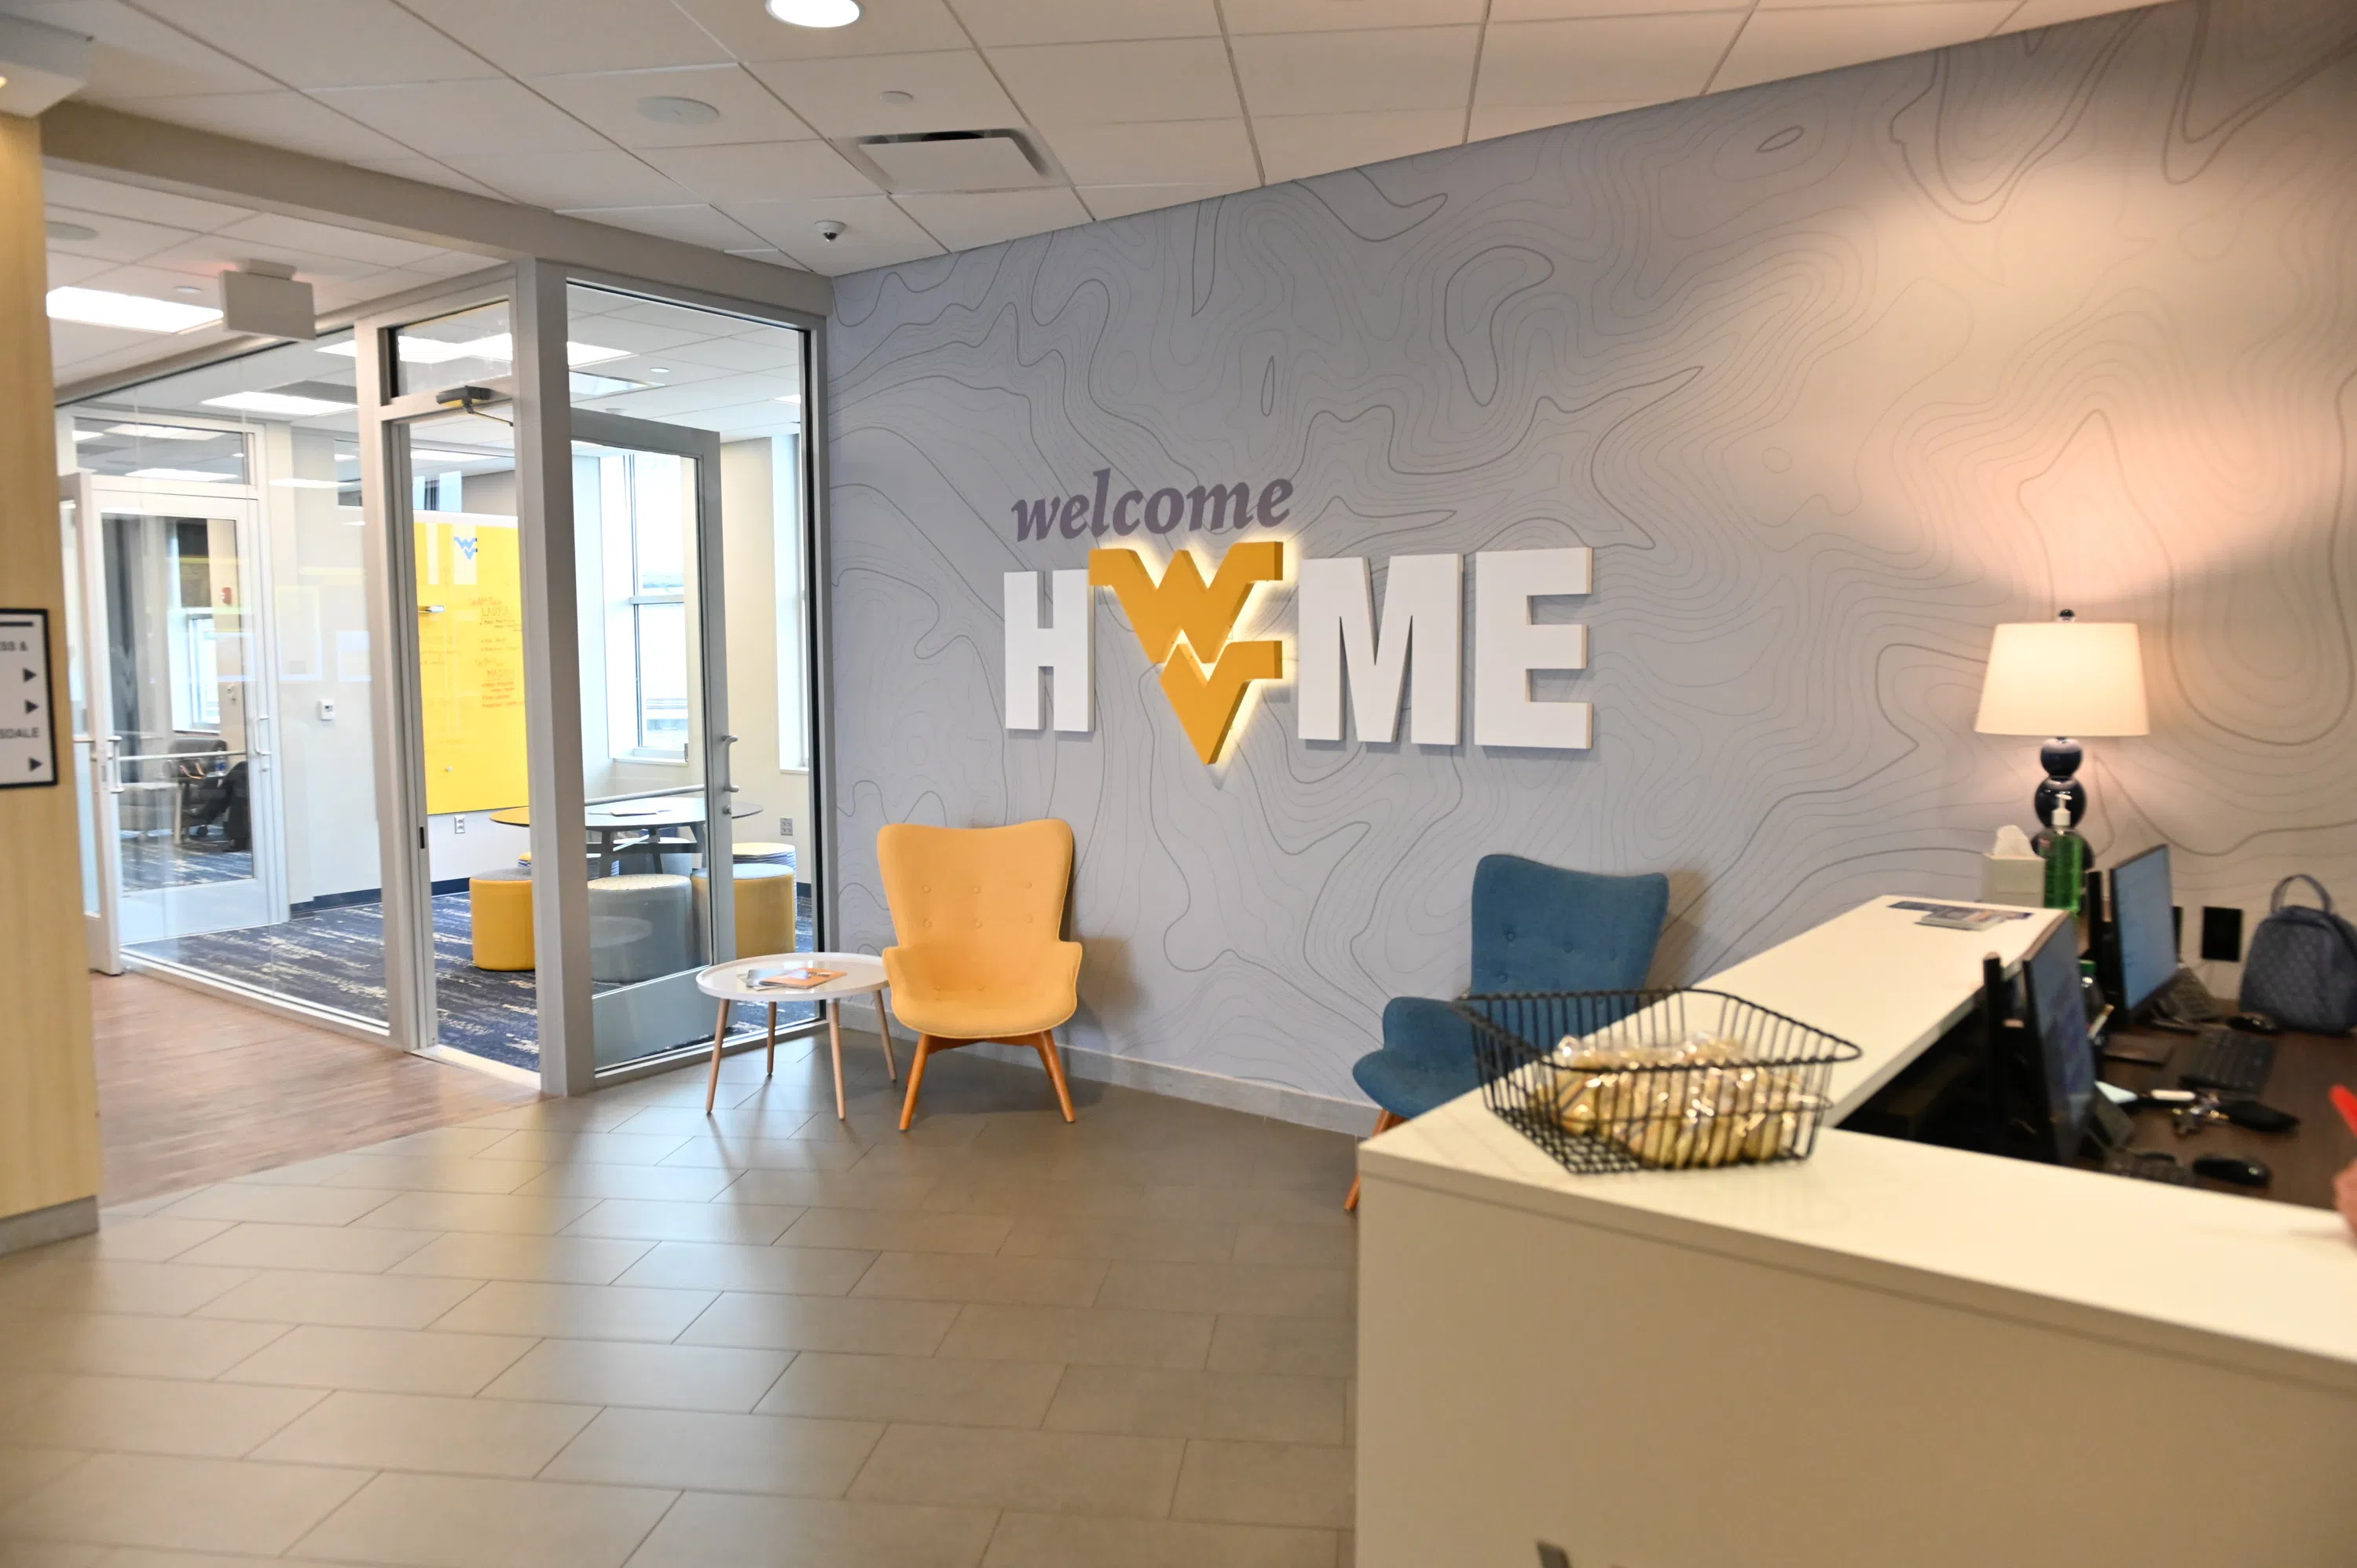 The front desk of the Evansdale Visitors Center with the "Welcome Home" sign.